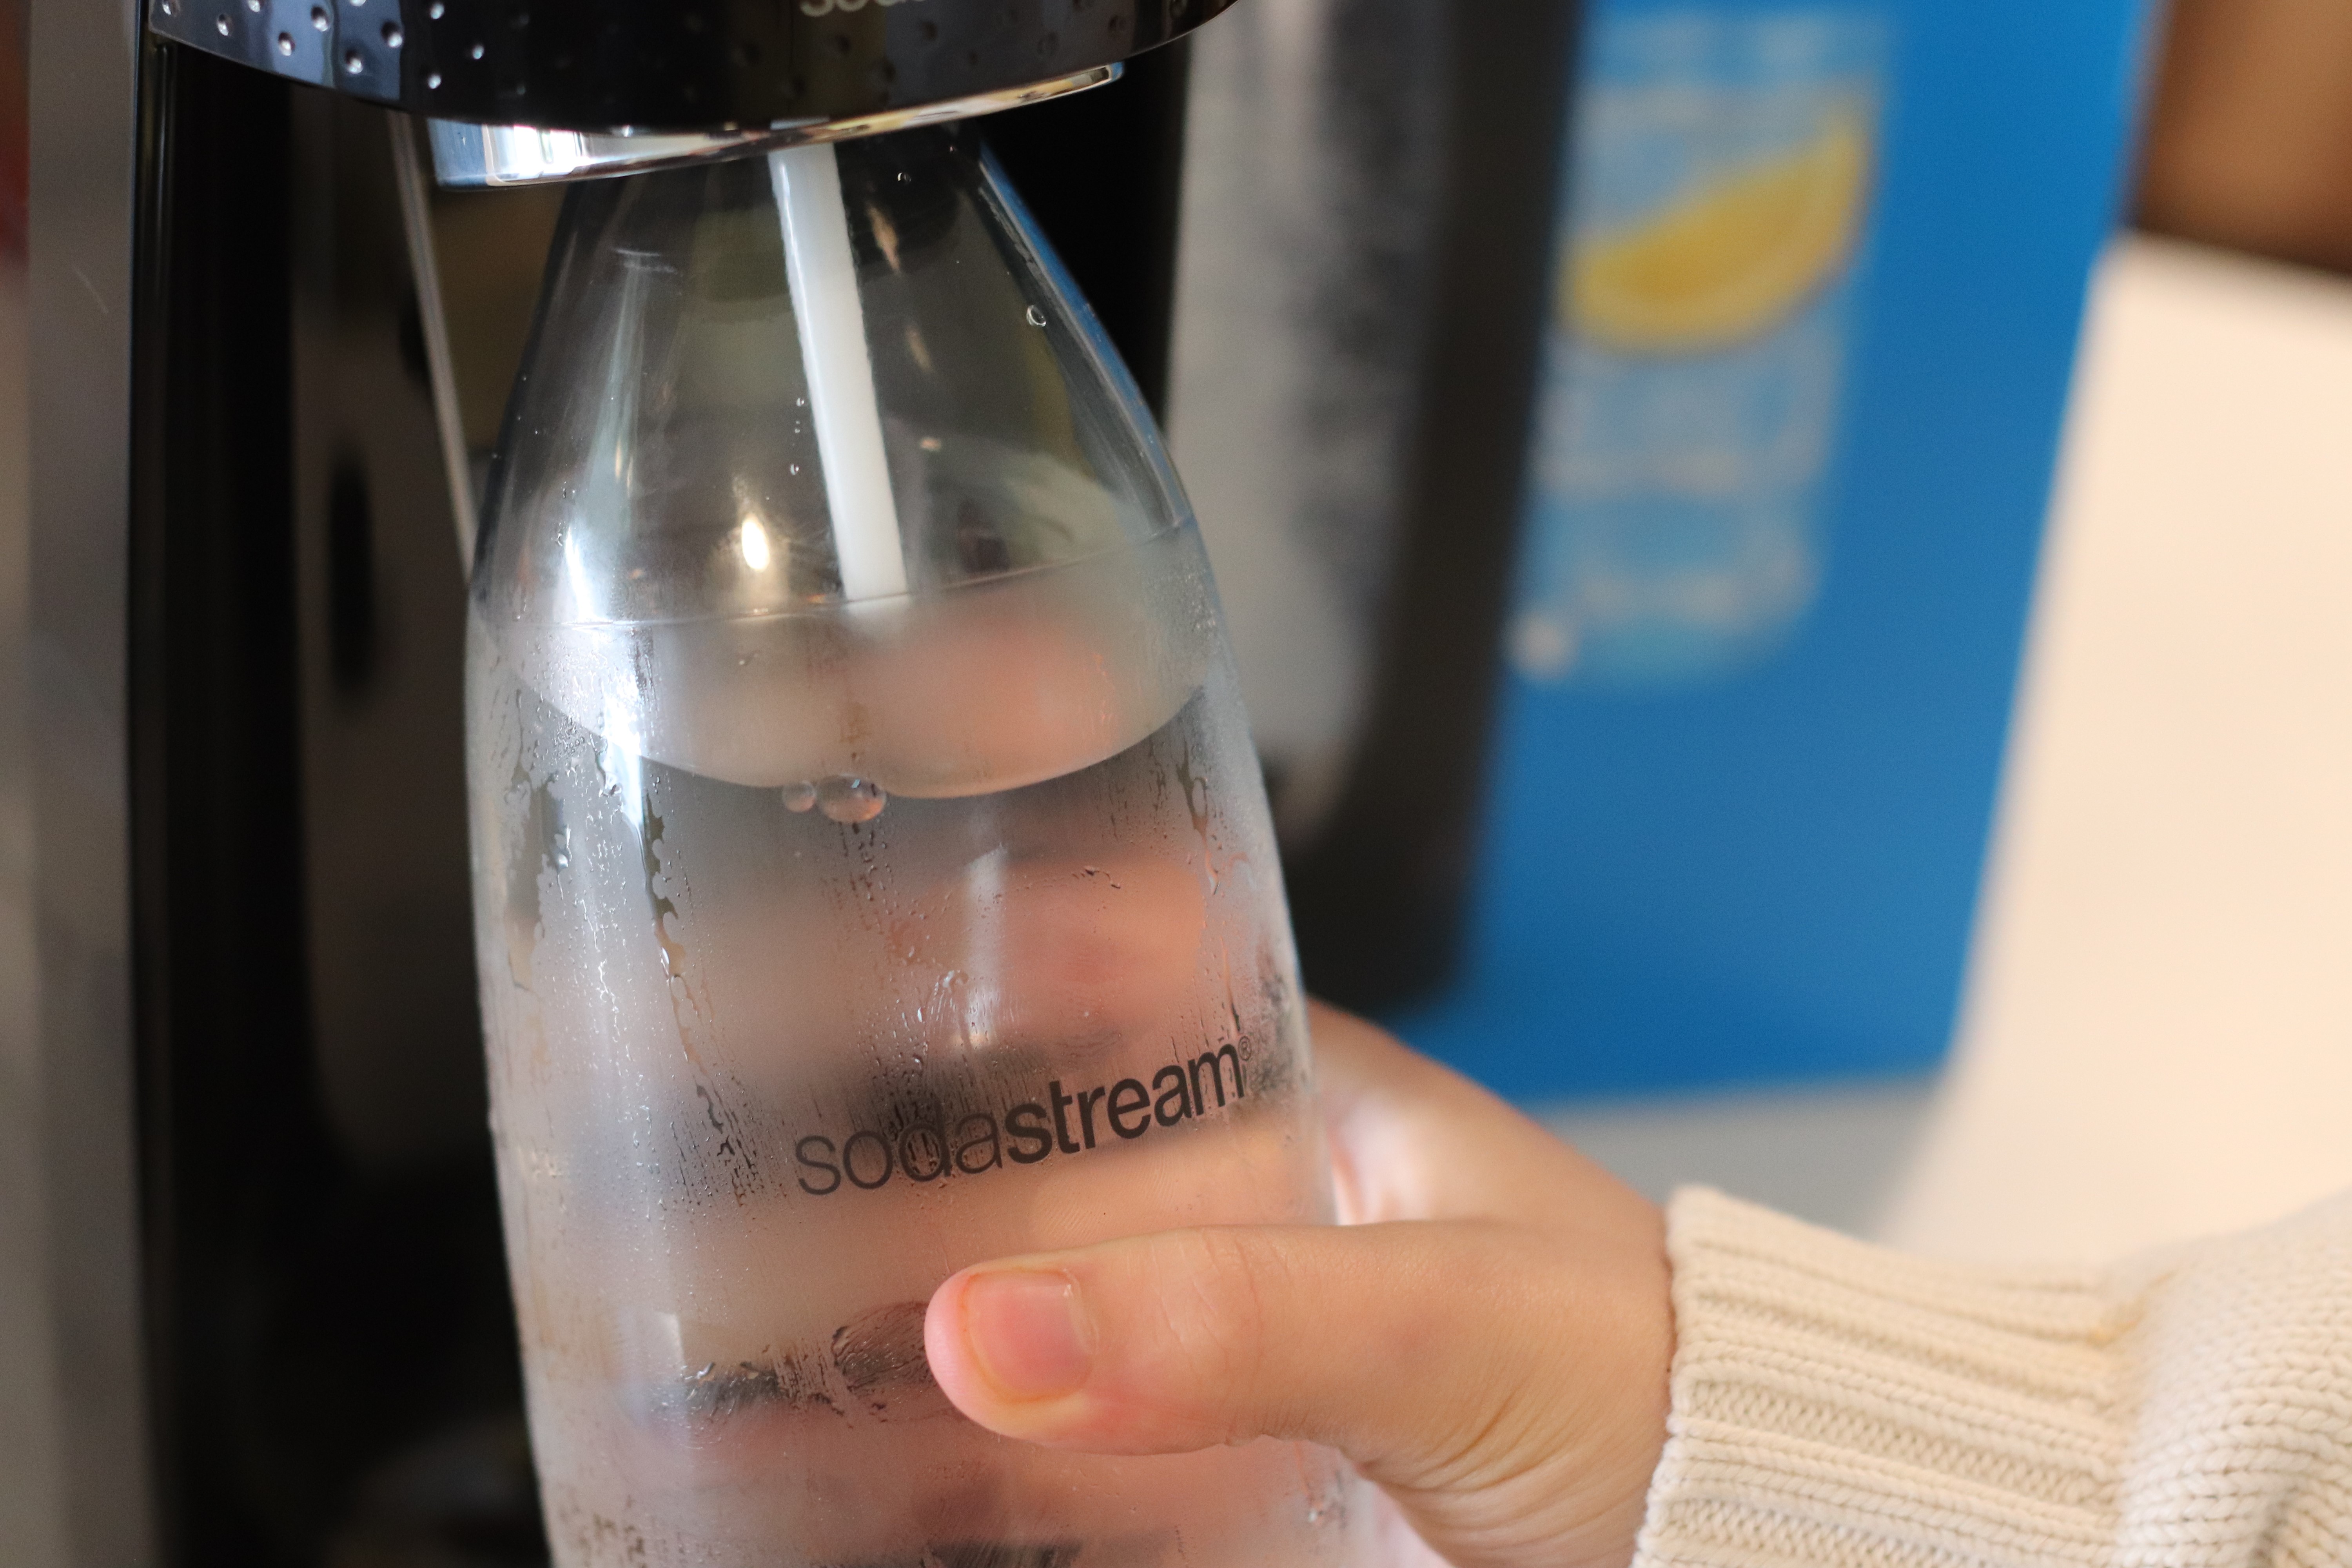 Does a SodaStream cut costs? This soda addict has mixed feelings